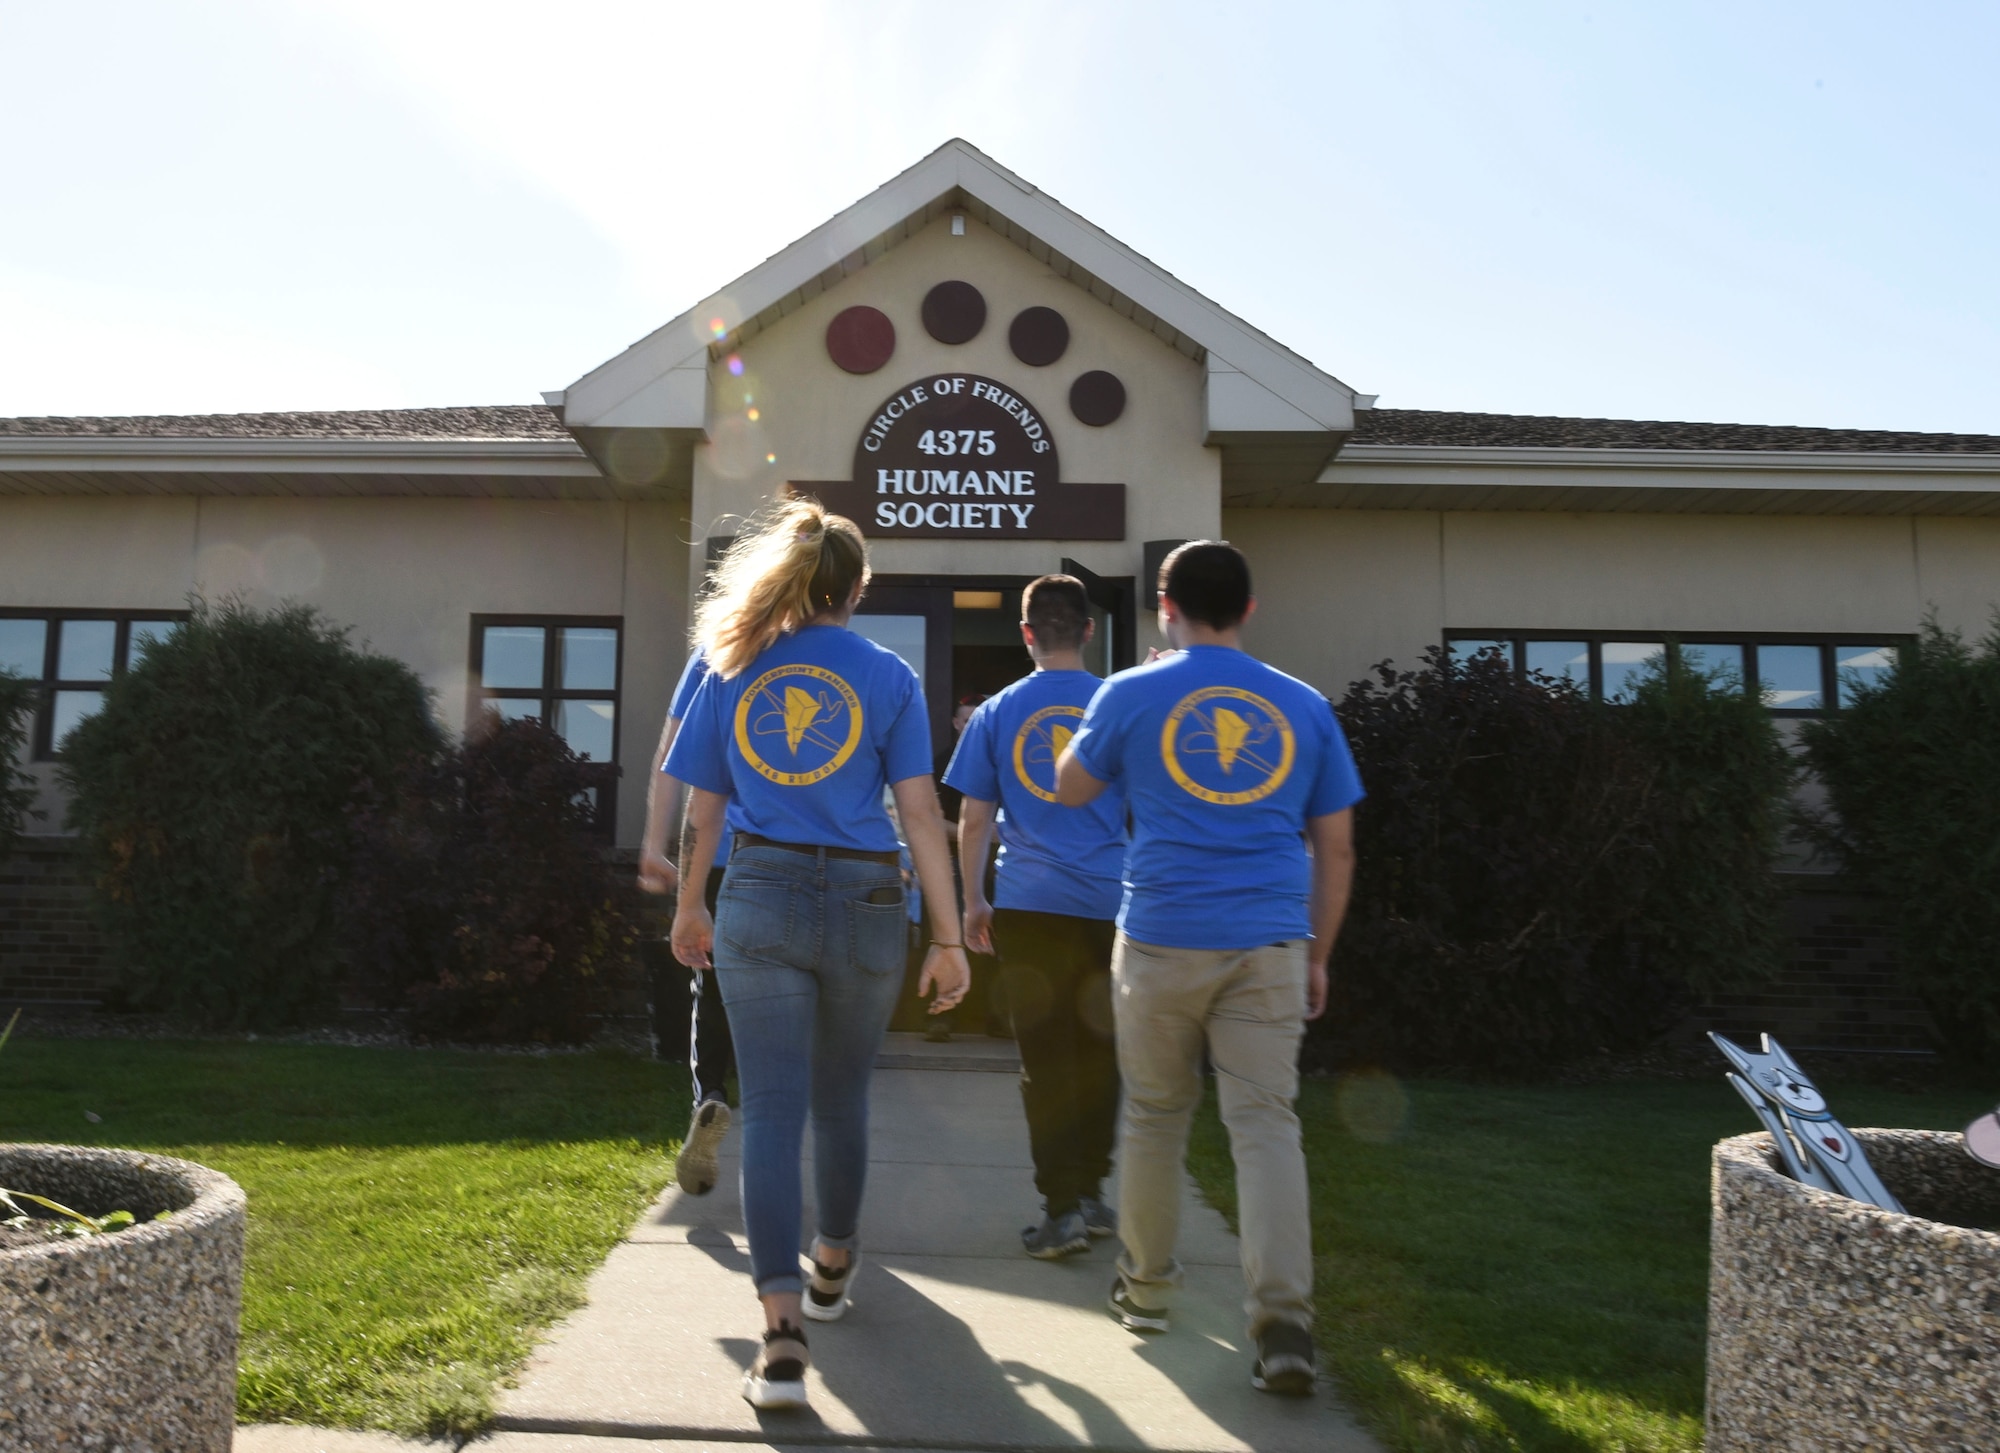 Members from the 348th Reconnaissance Squadron visit Circle of Friends Humane Society to volunteer Sept. 19, 2018, in Grand Forks, North Dakota. The volunteering consisted of tasks being split among the 348 RS members, such as folding towels and cleaning up trash near the animal shelter. (U.S. Air Force photo by Airman 1st Class Melody Wolff)